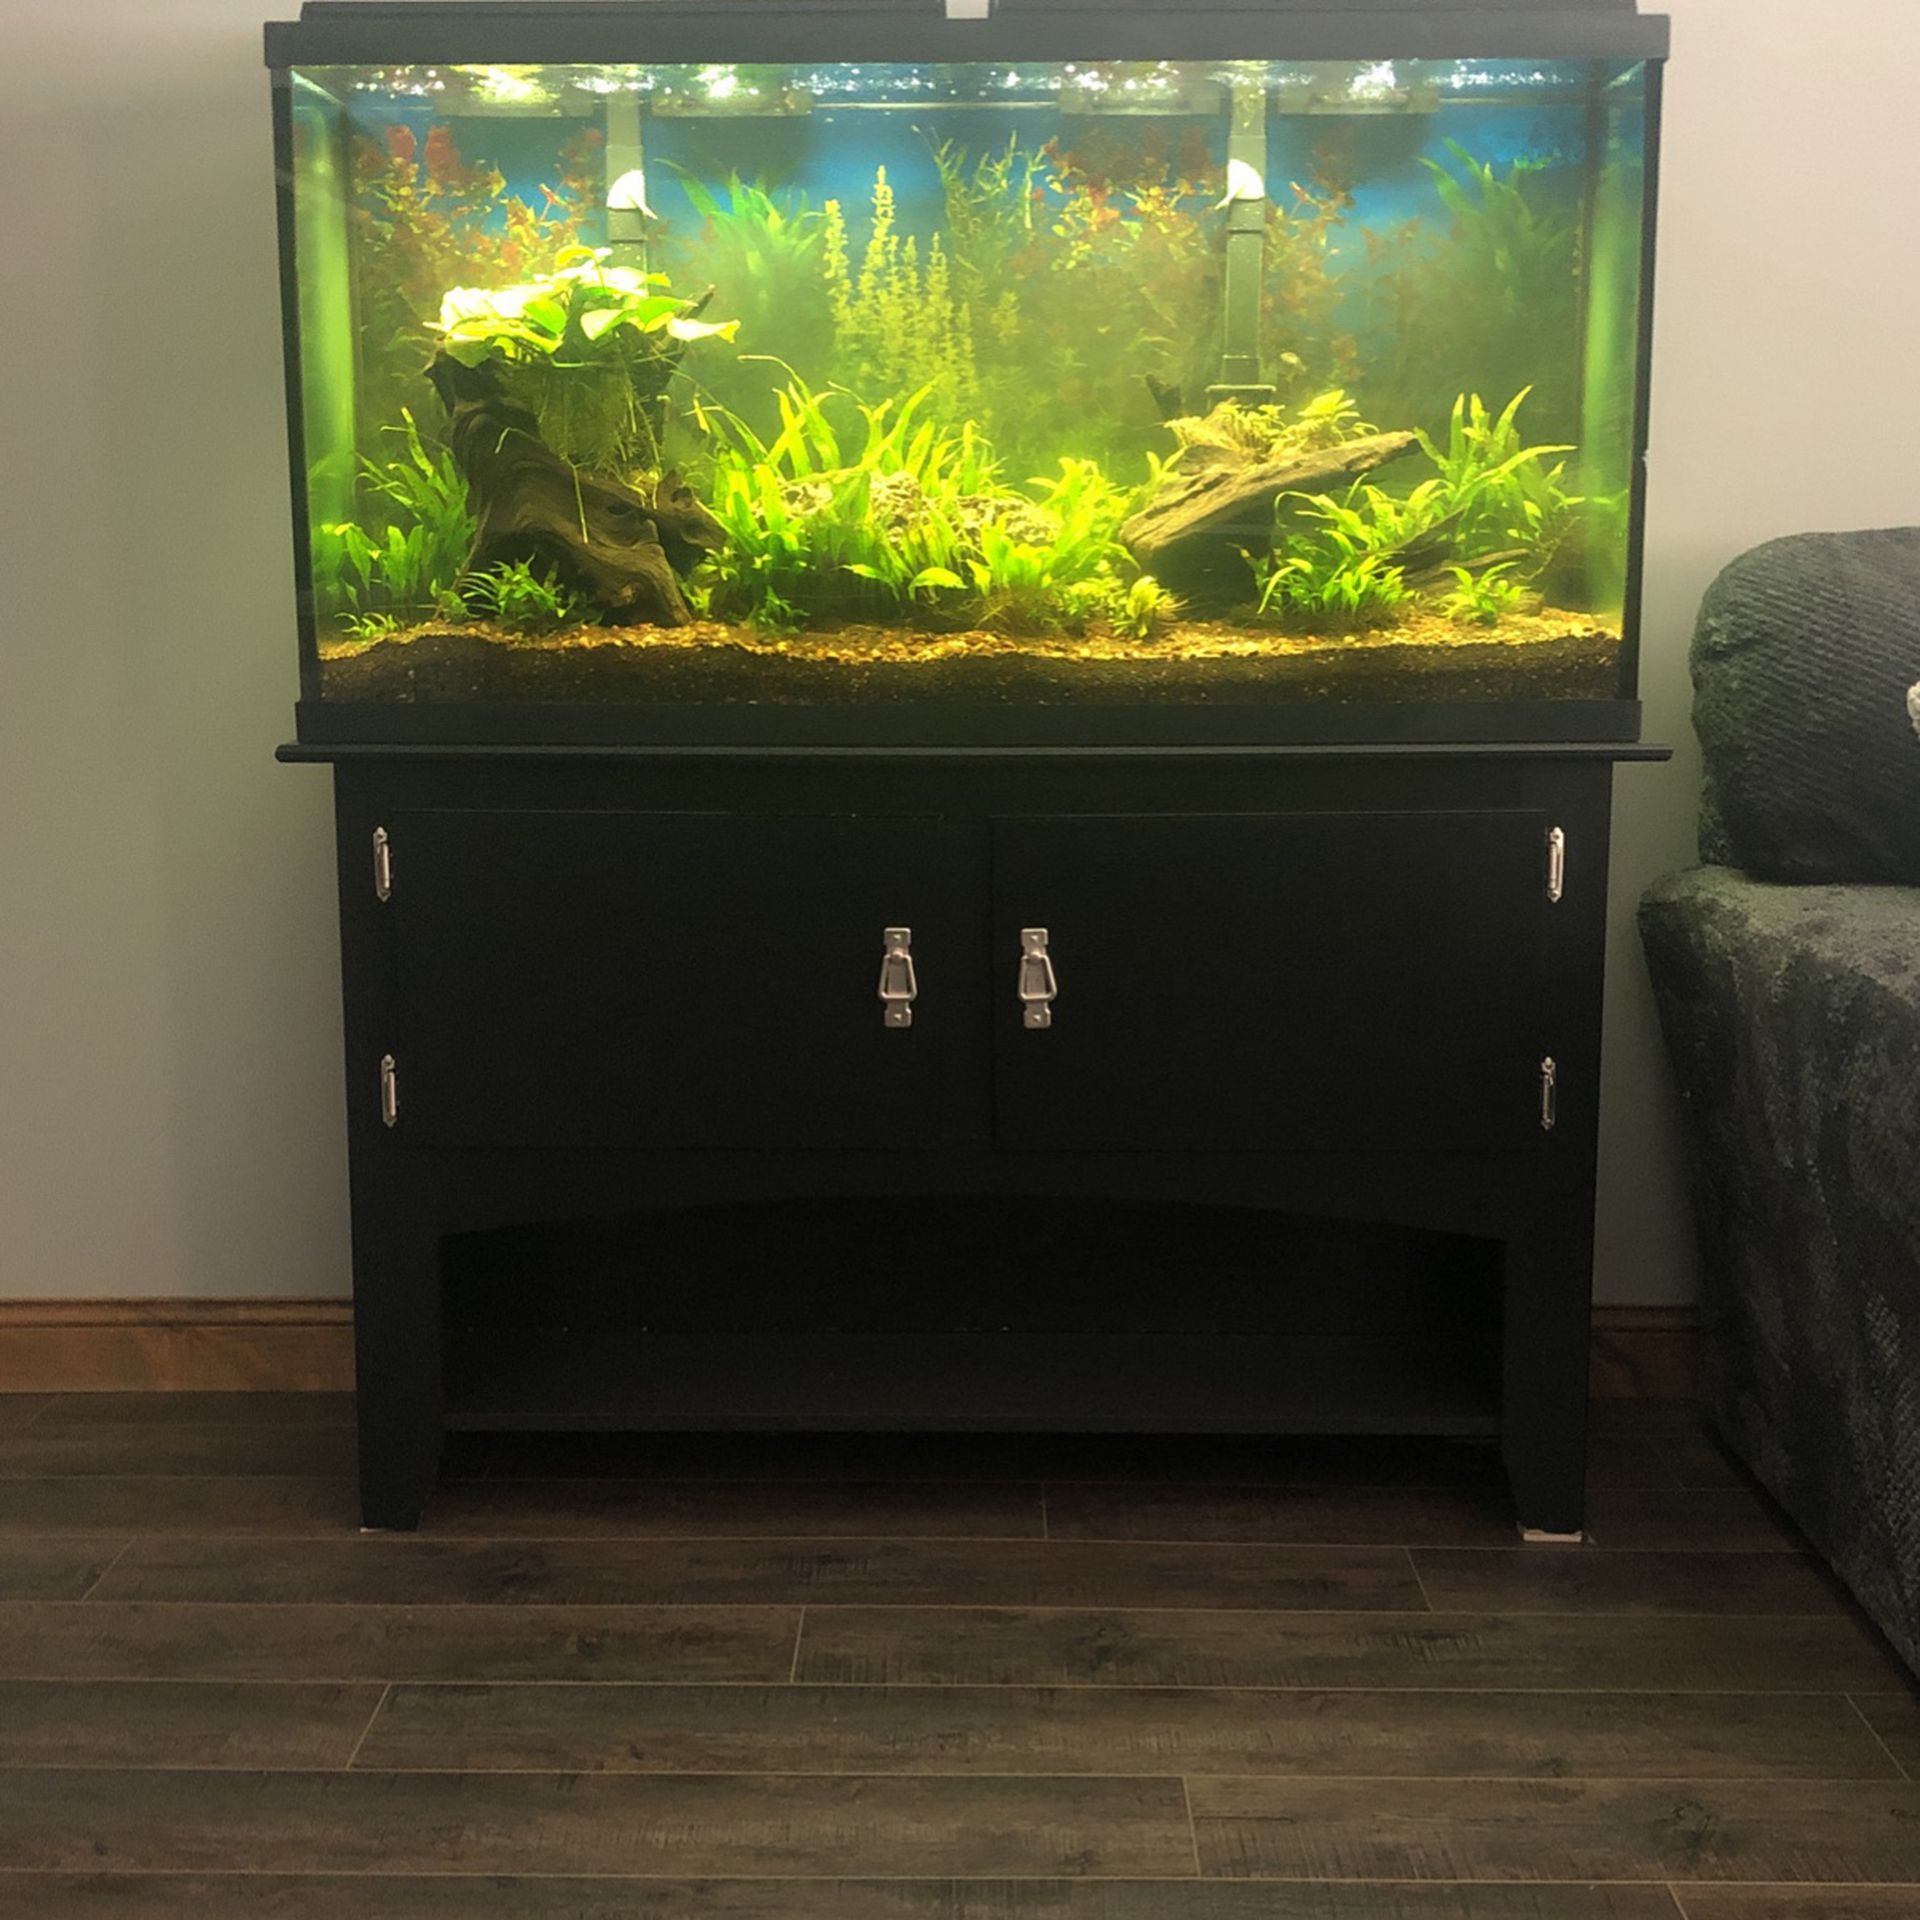 60 Gallon  Aquarium. $600 Invested Coral RLight, 2 Marine land Power Filters, Gravel, 2 Driftwood Decorations , Rocks  and  Live Plants